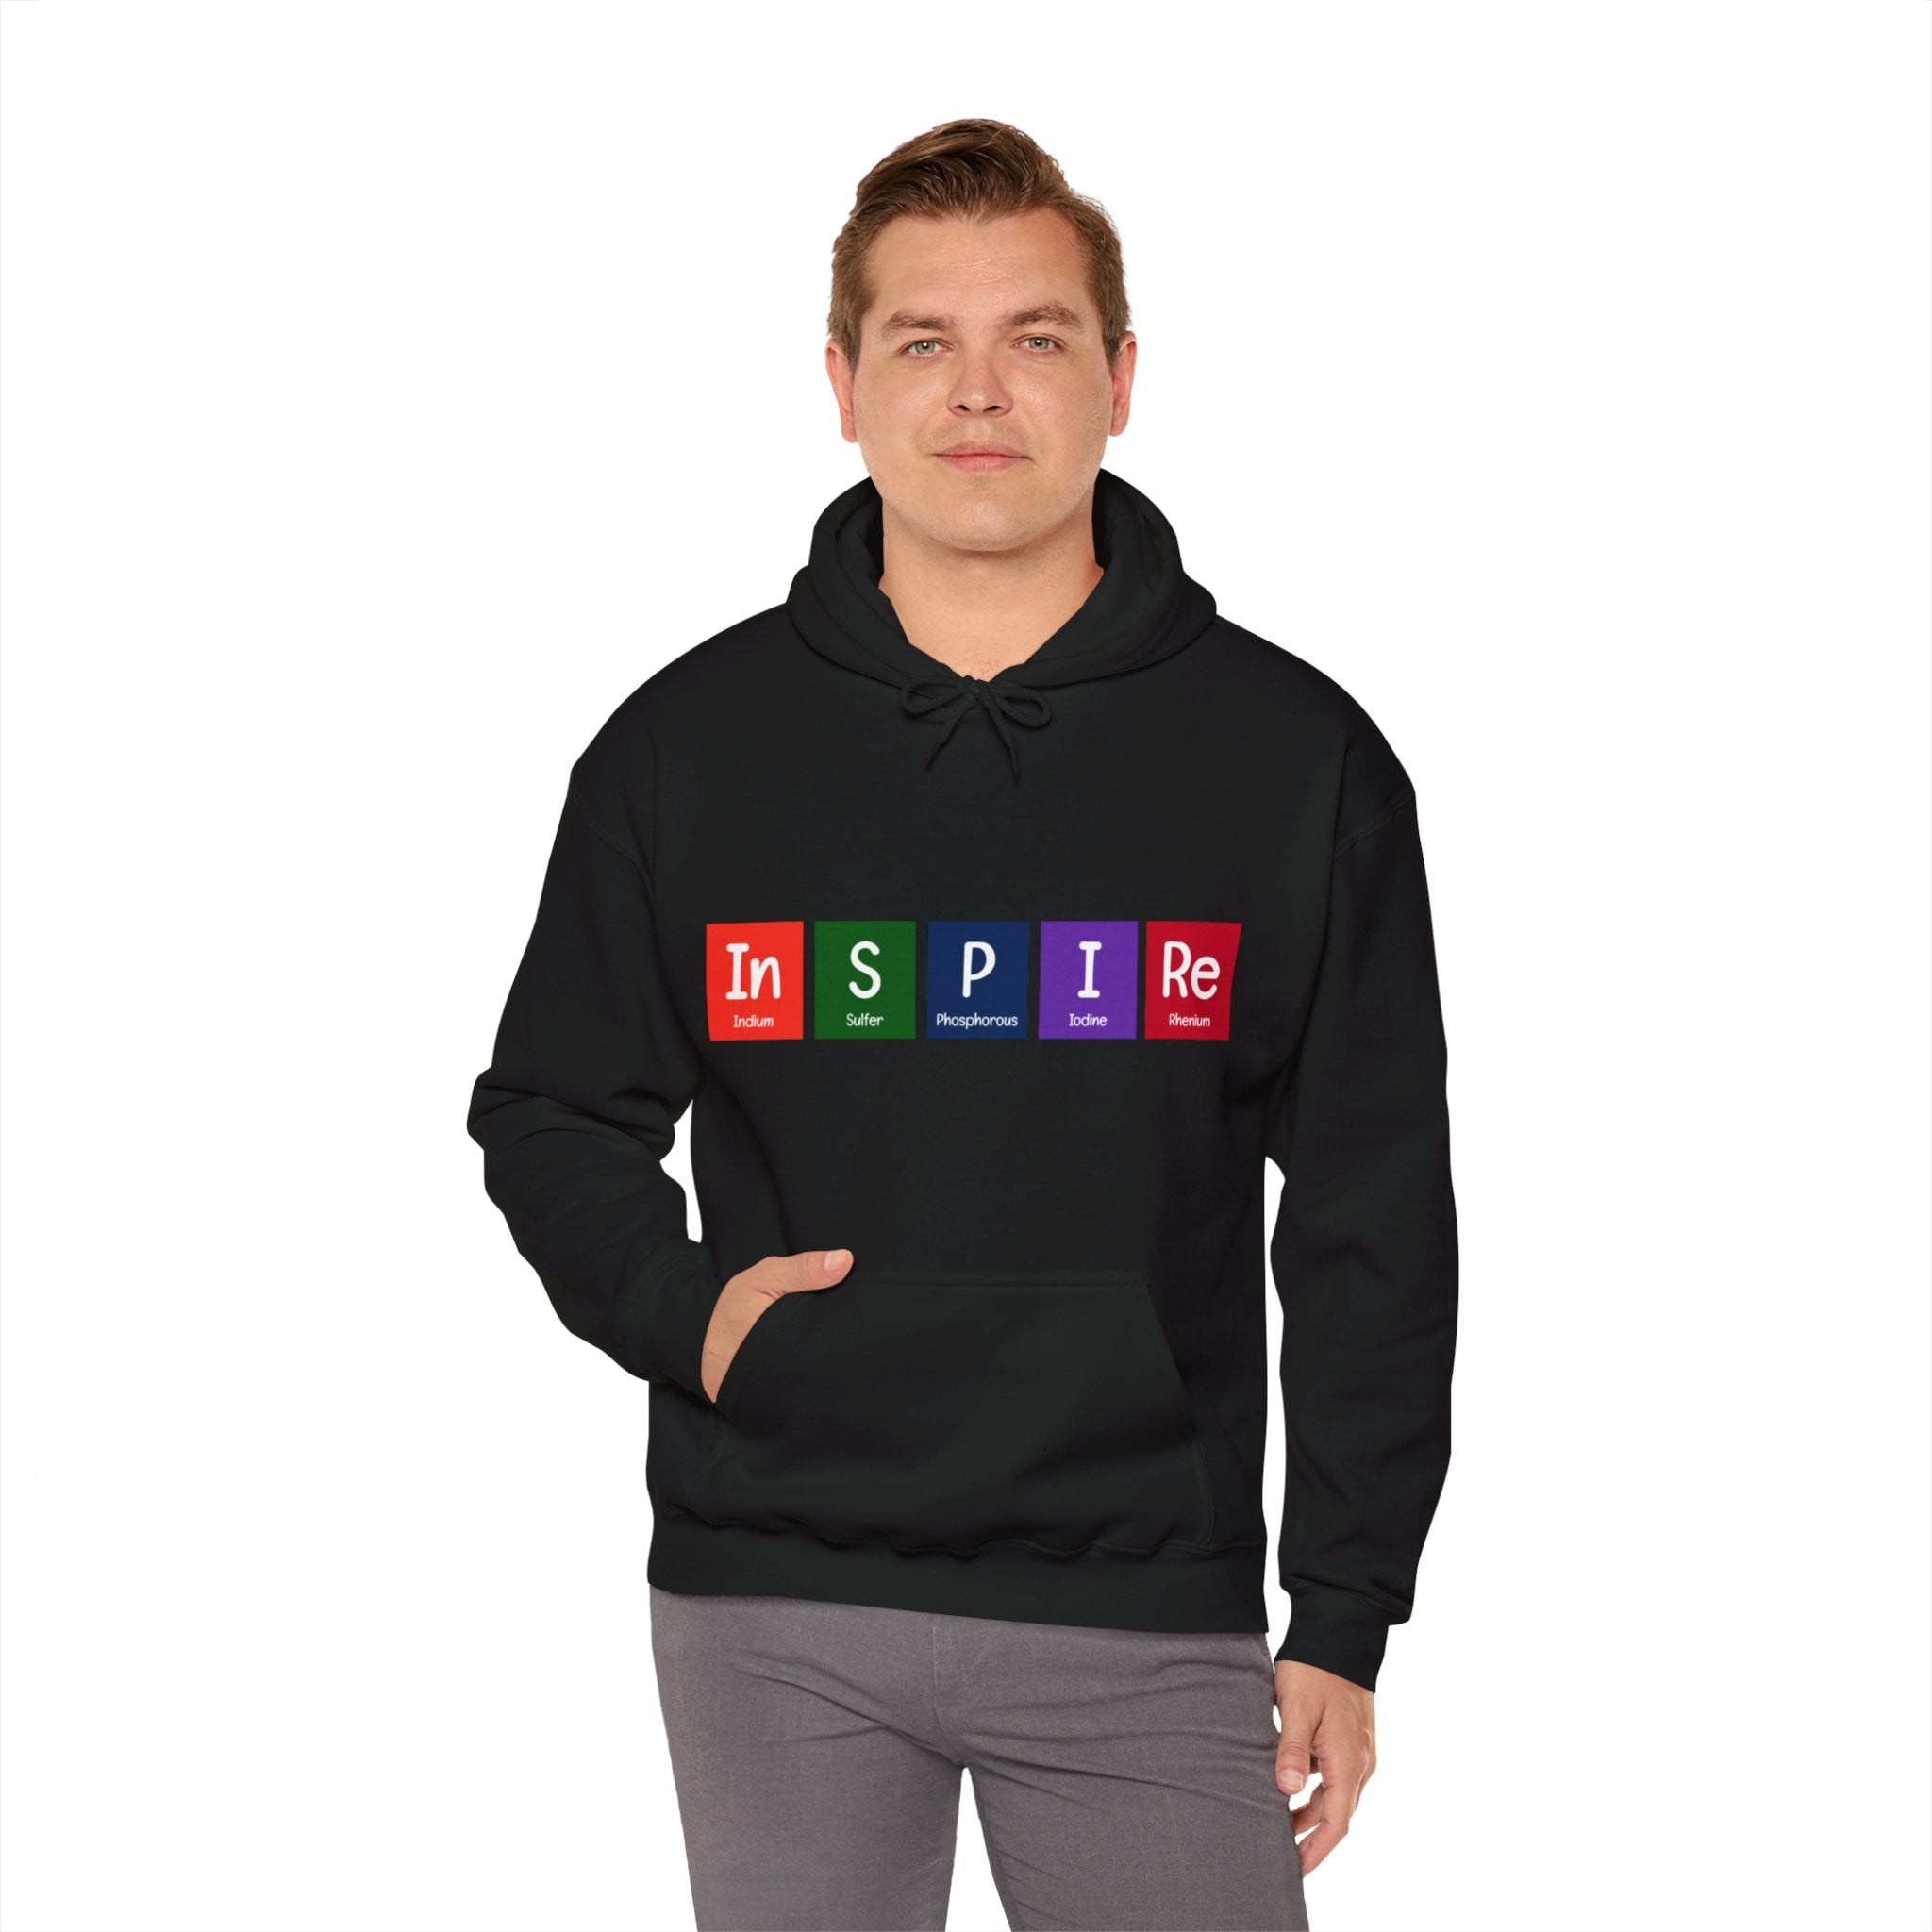 A person wearing an In-S-P-I-Re Hooded Sweatshirt made of comfortable cotton with the word "INSPIRE" printed in colorful blocks stands against a plain white background, showcasing perfect daily wear.